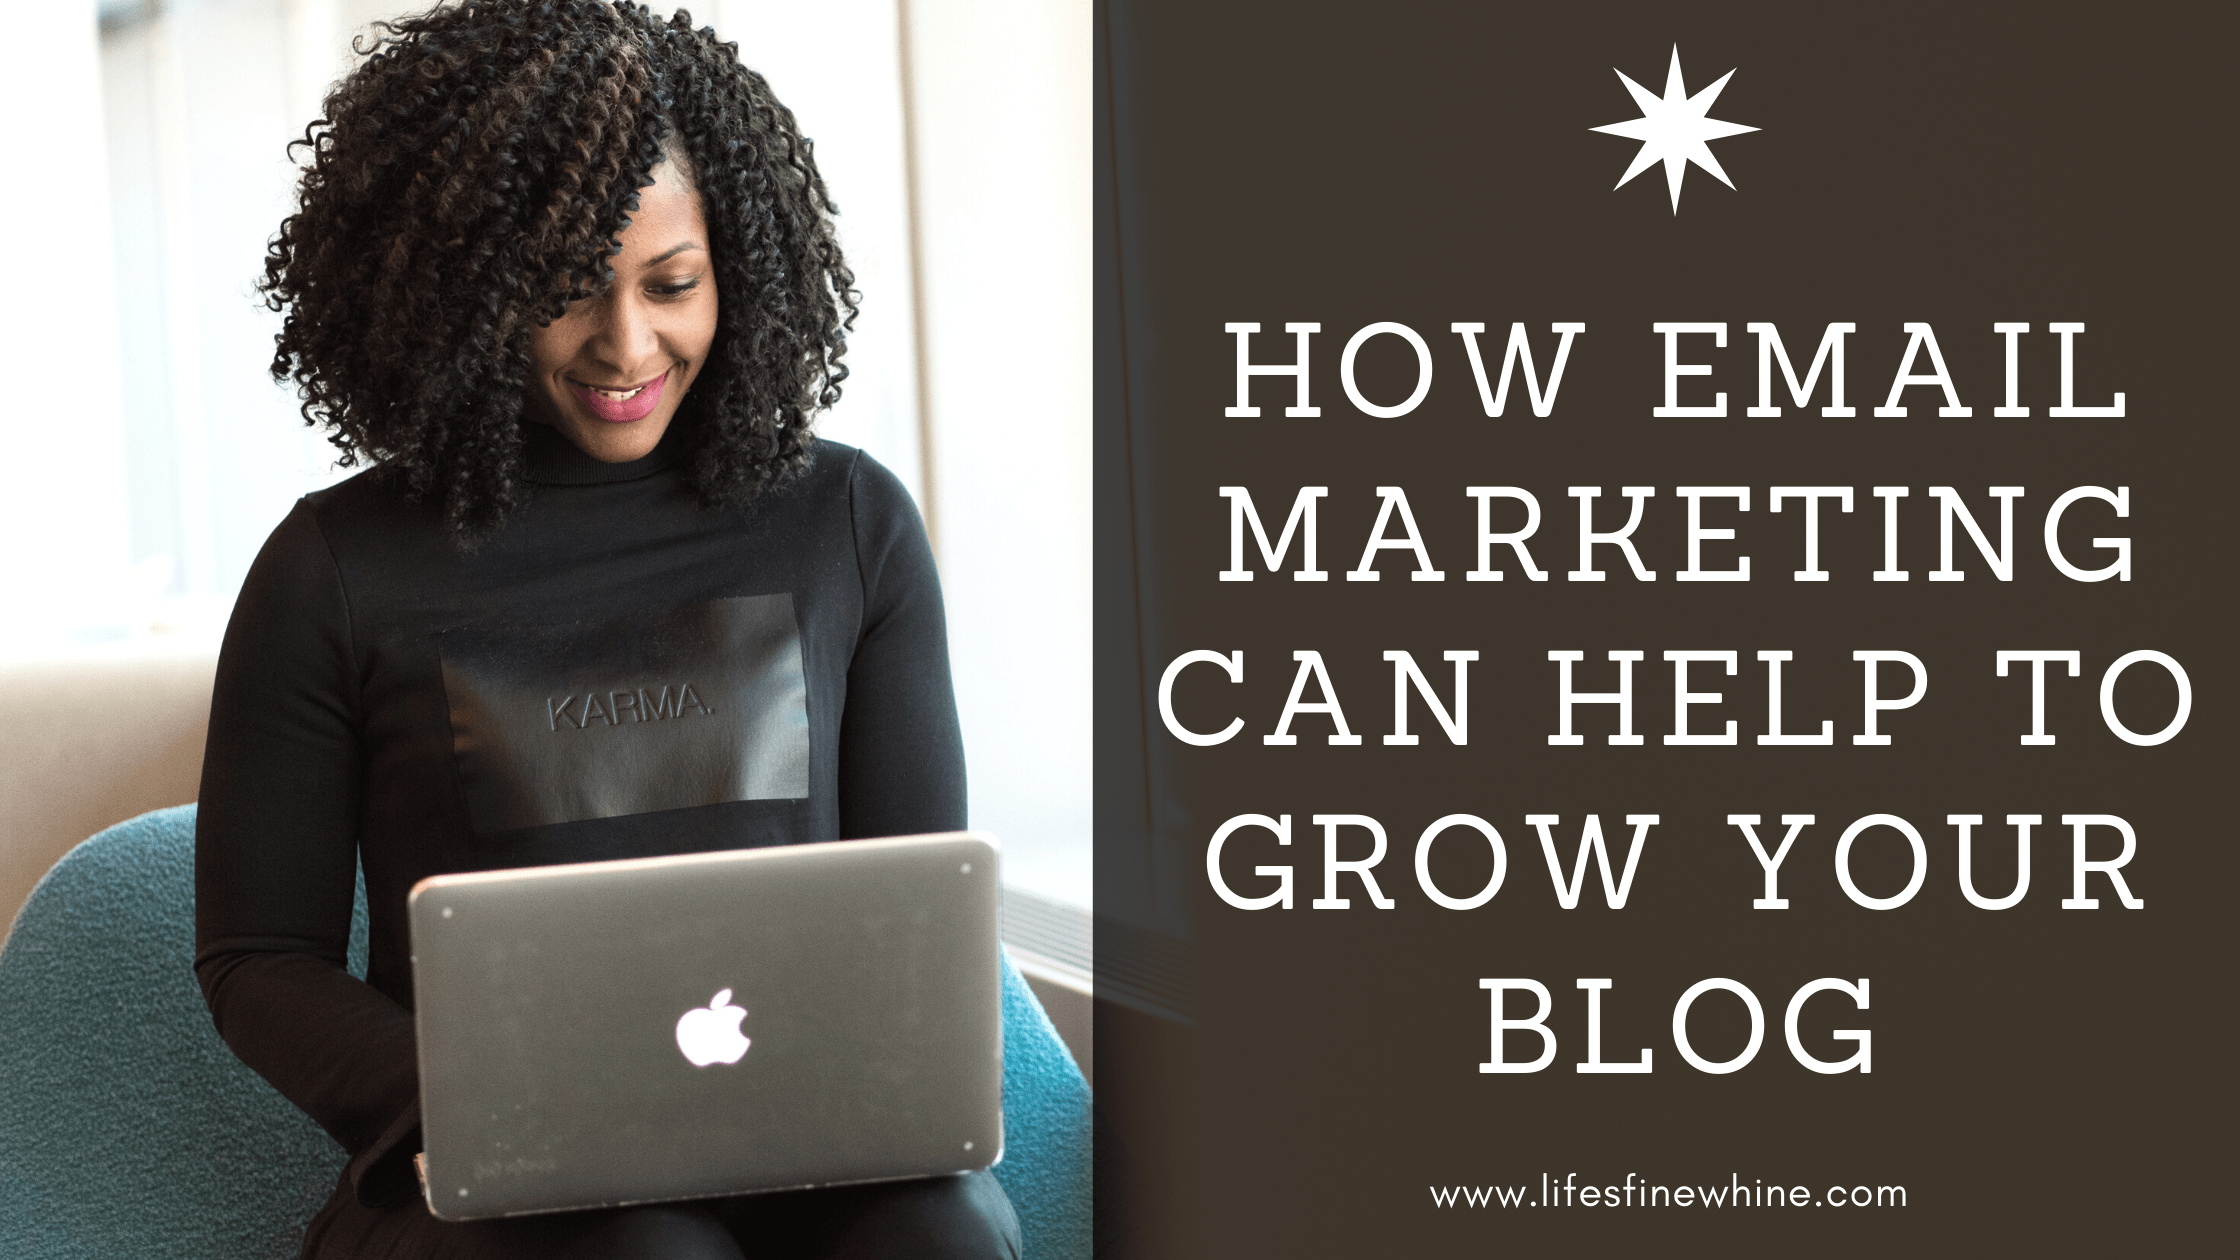 How Email Marketing Can Help Grow Your Blog